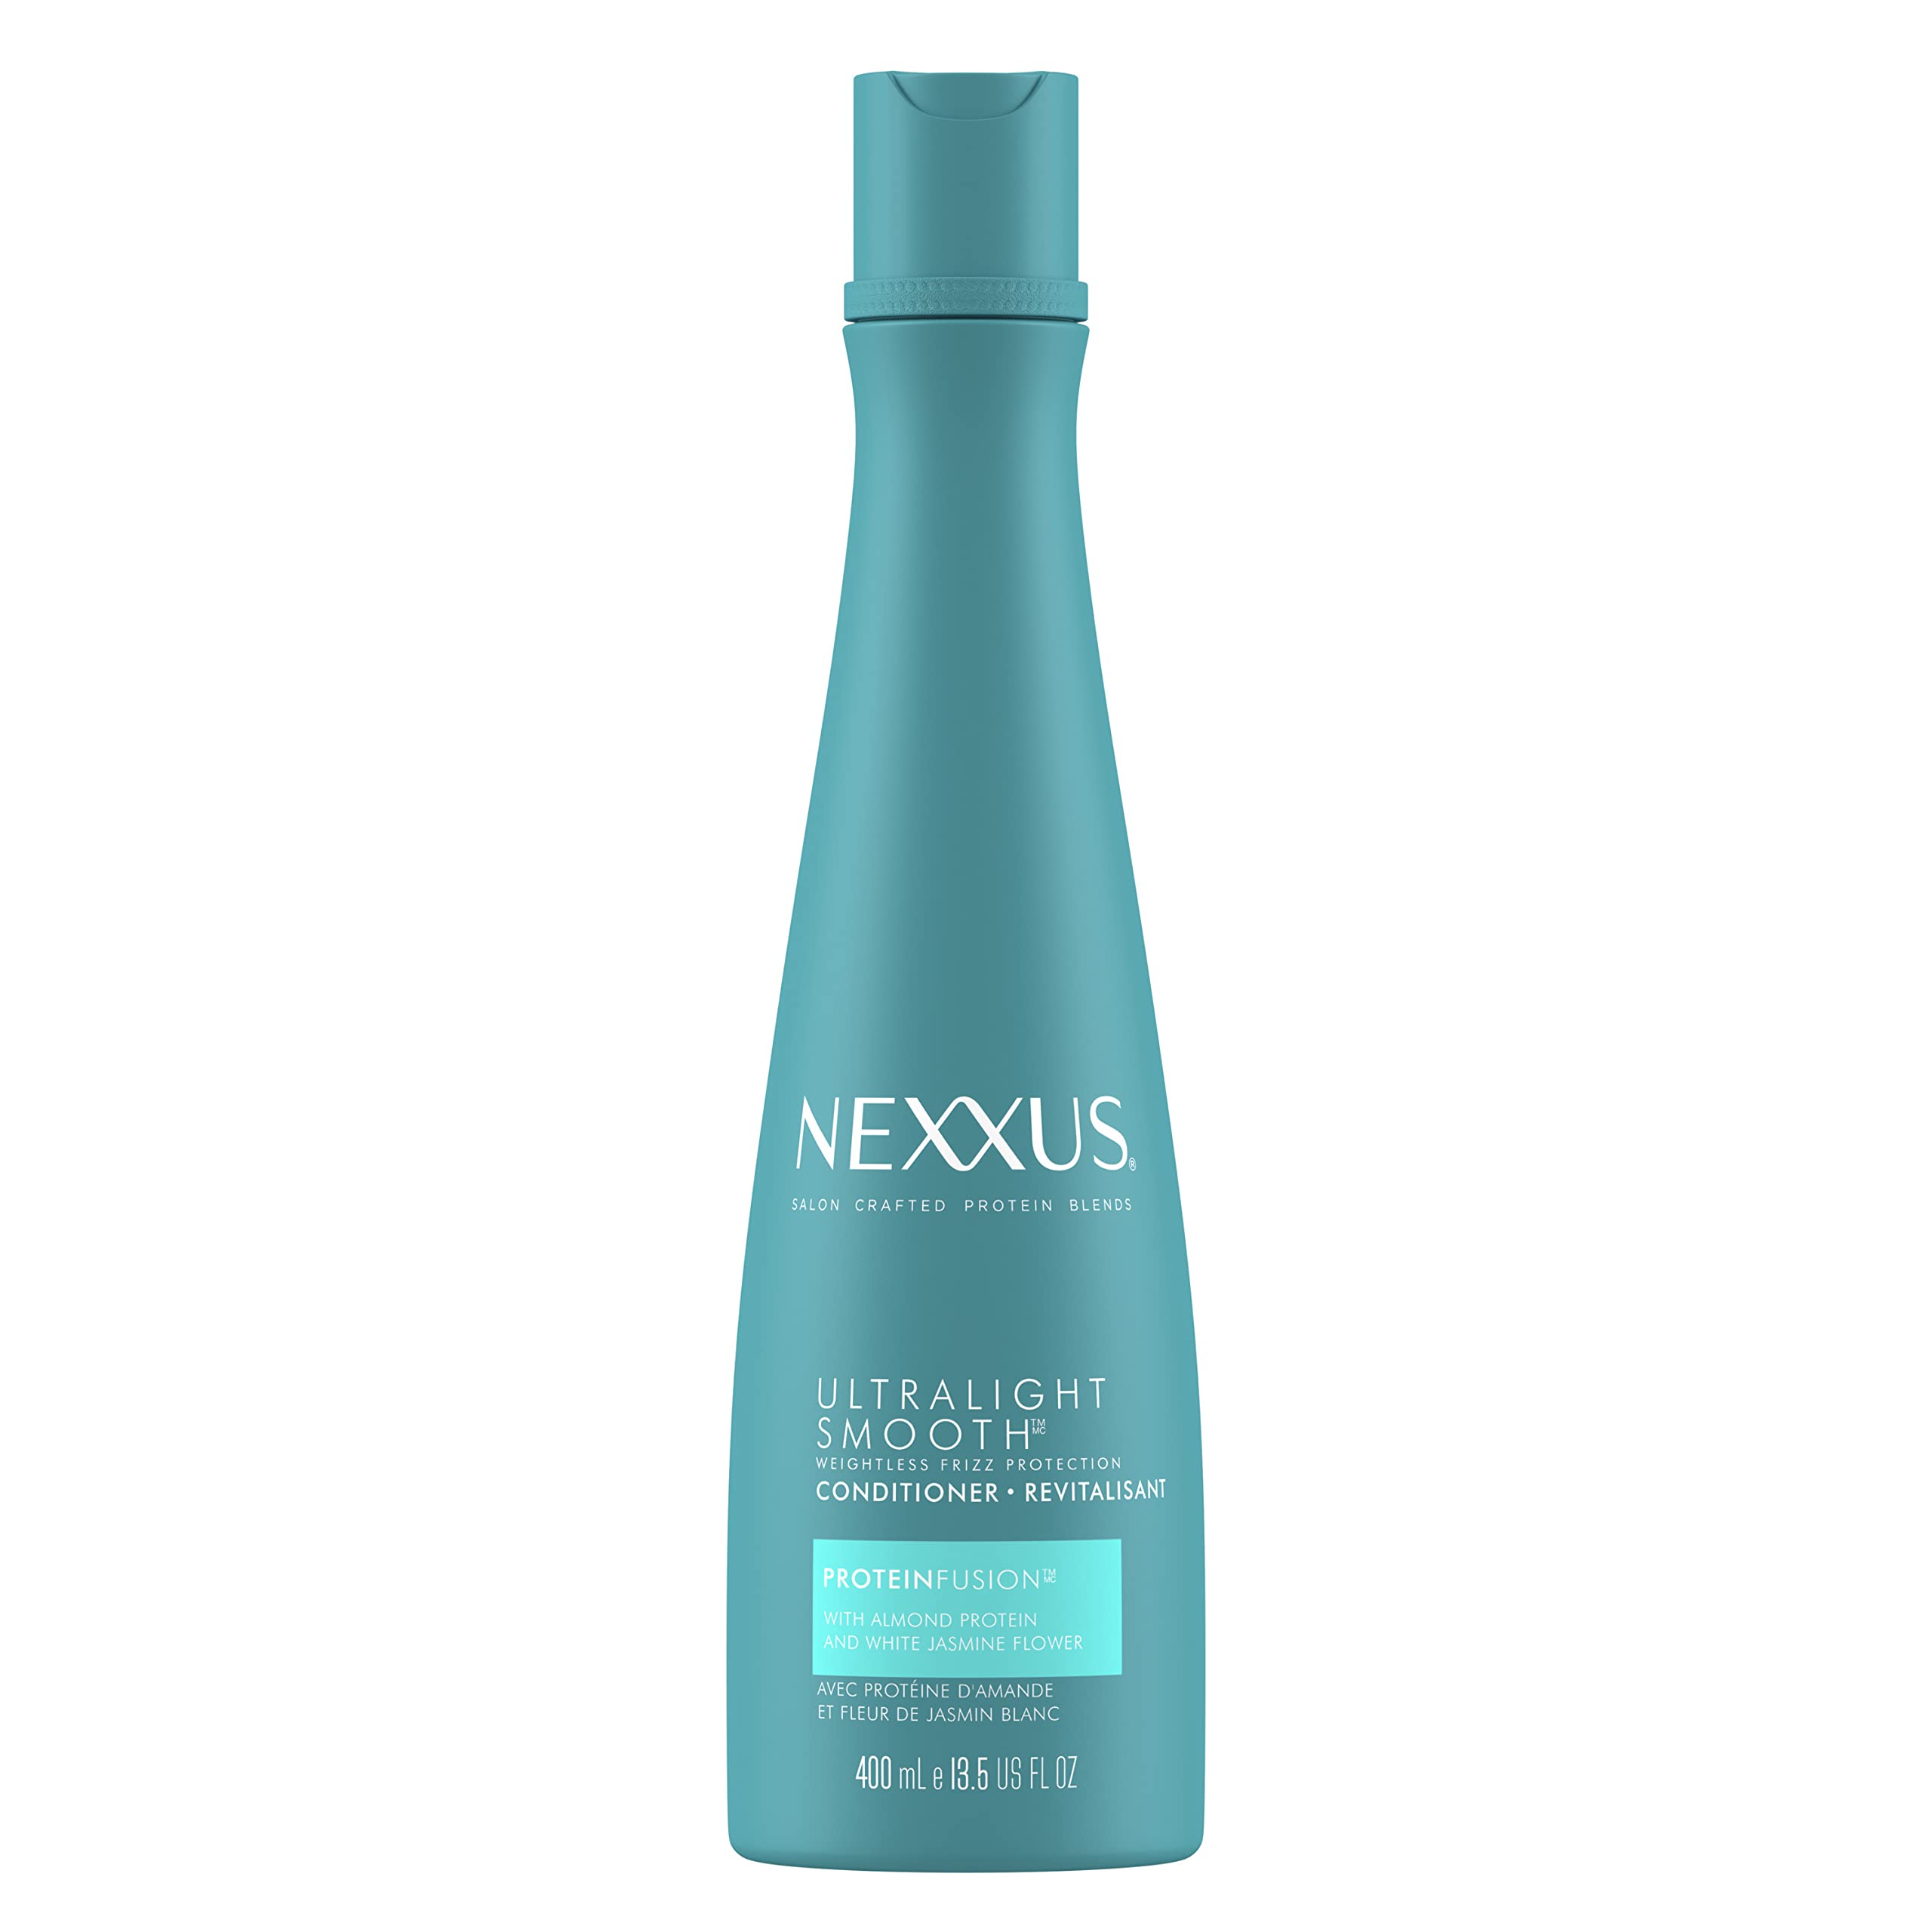 Nexxus Ultralight Smooth Conditioner for Dry and Frizzy Hair Weightless Smooth Hair Treatment to Block Out Frizz Against Humidity 13.5 oz